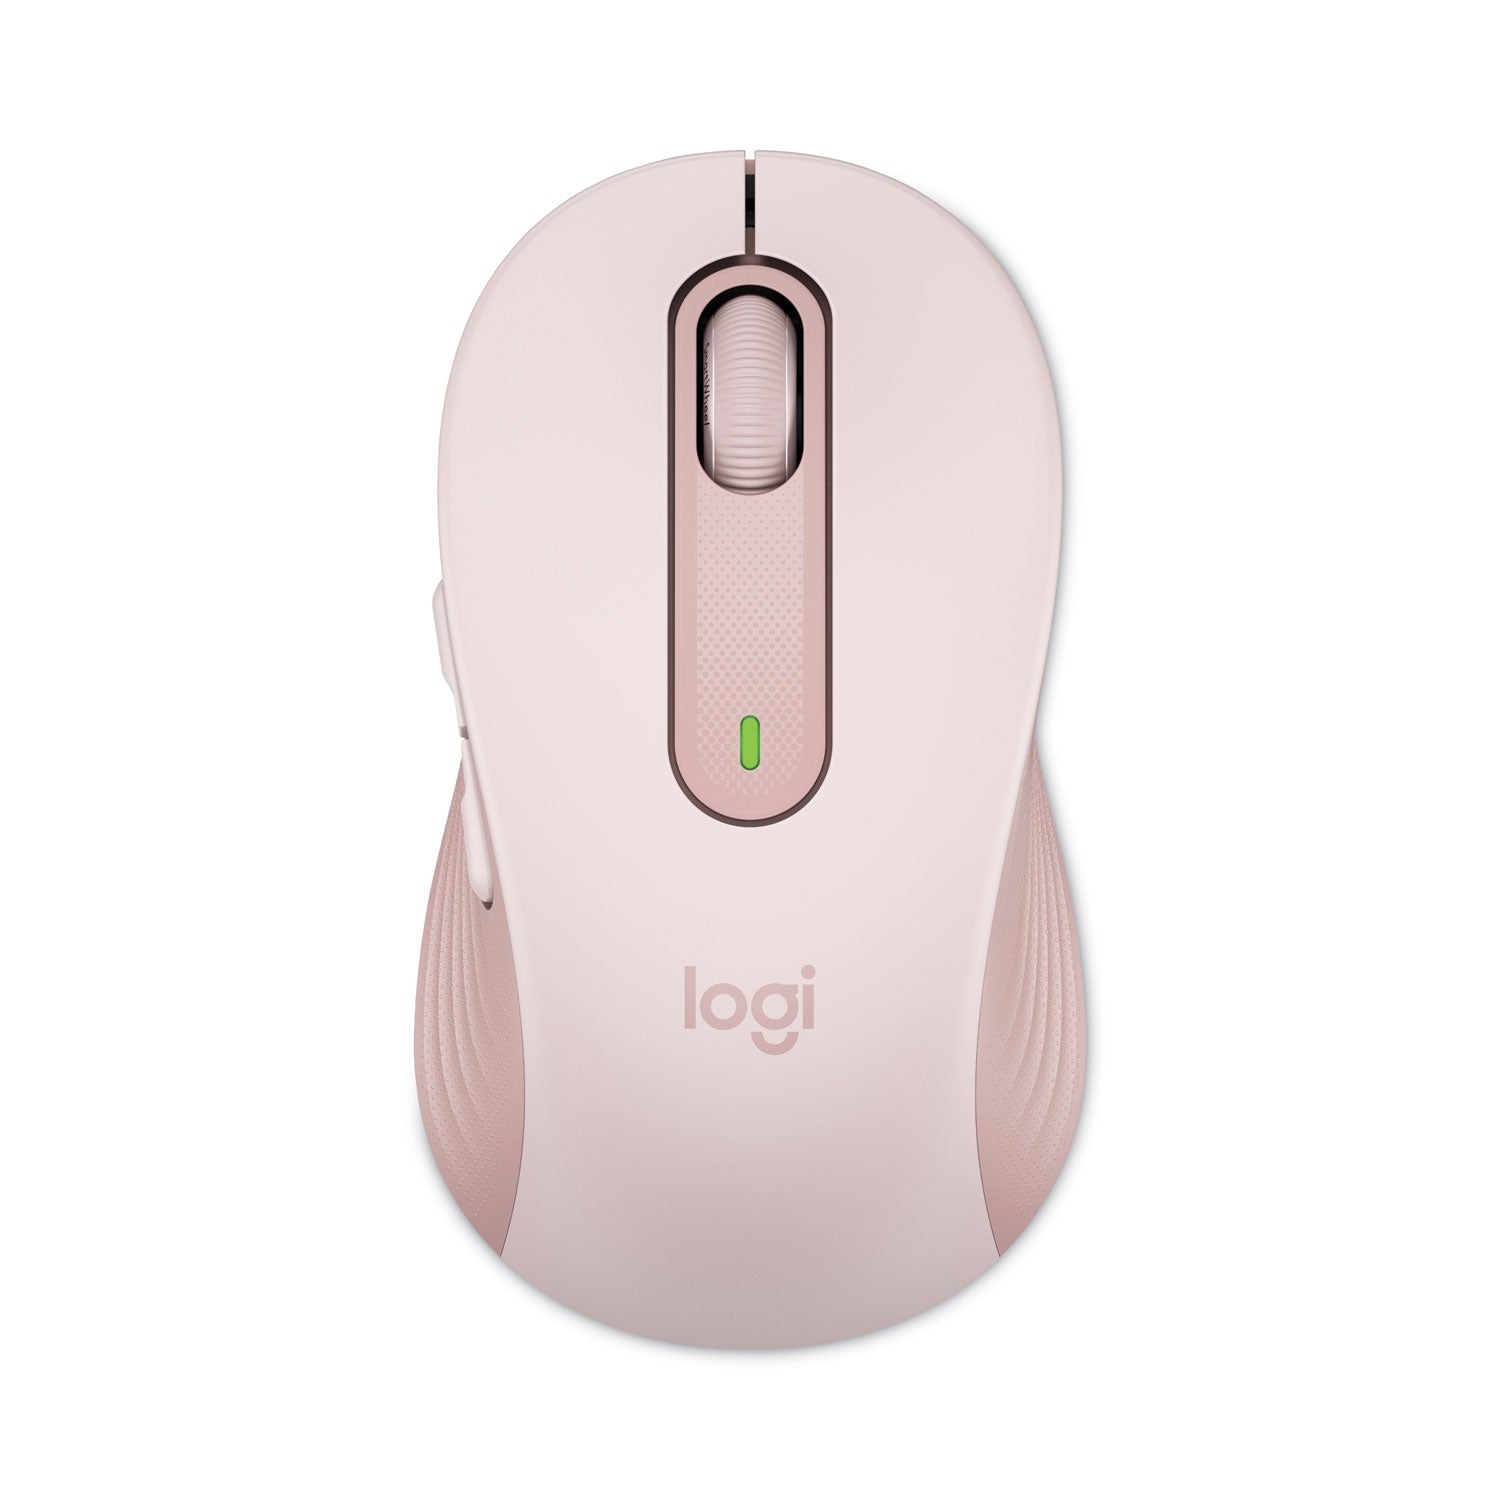 signature-m650-wireless-mouse-medium-24-ghz-frequency-33-ft-wireless-range-right-hand-use-rose_log910006251 - 1